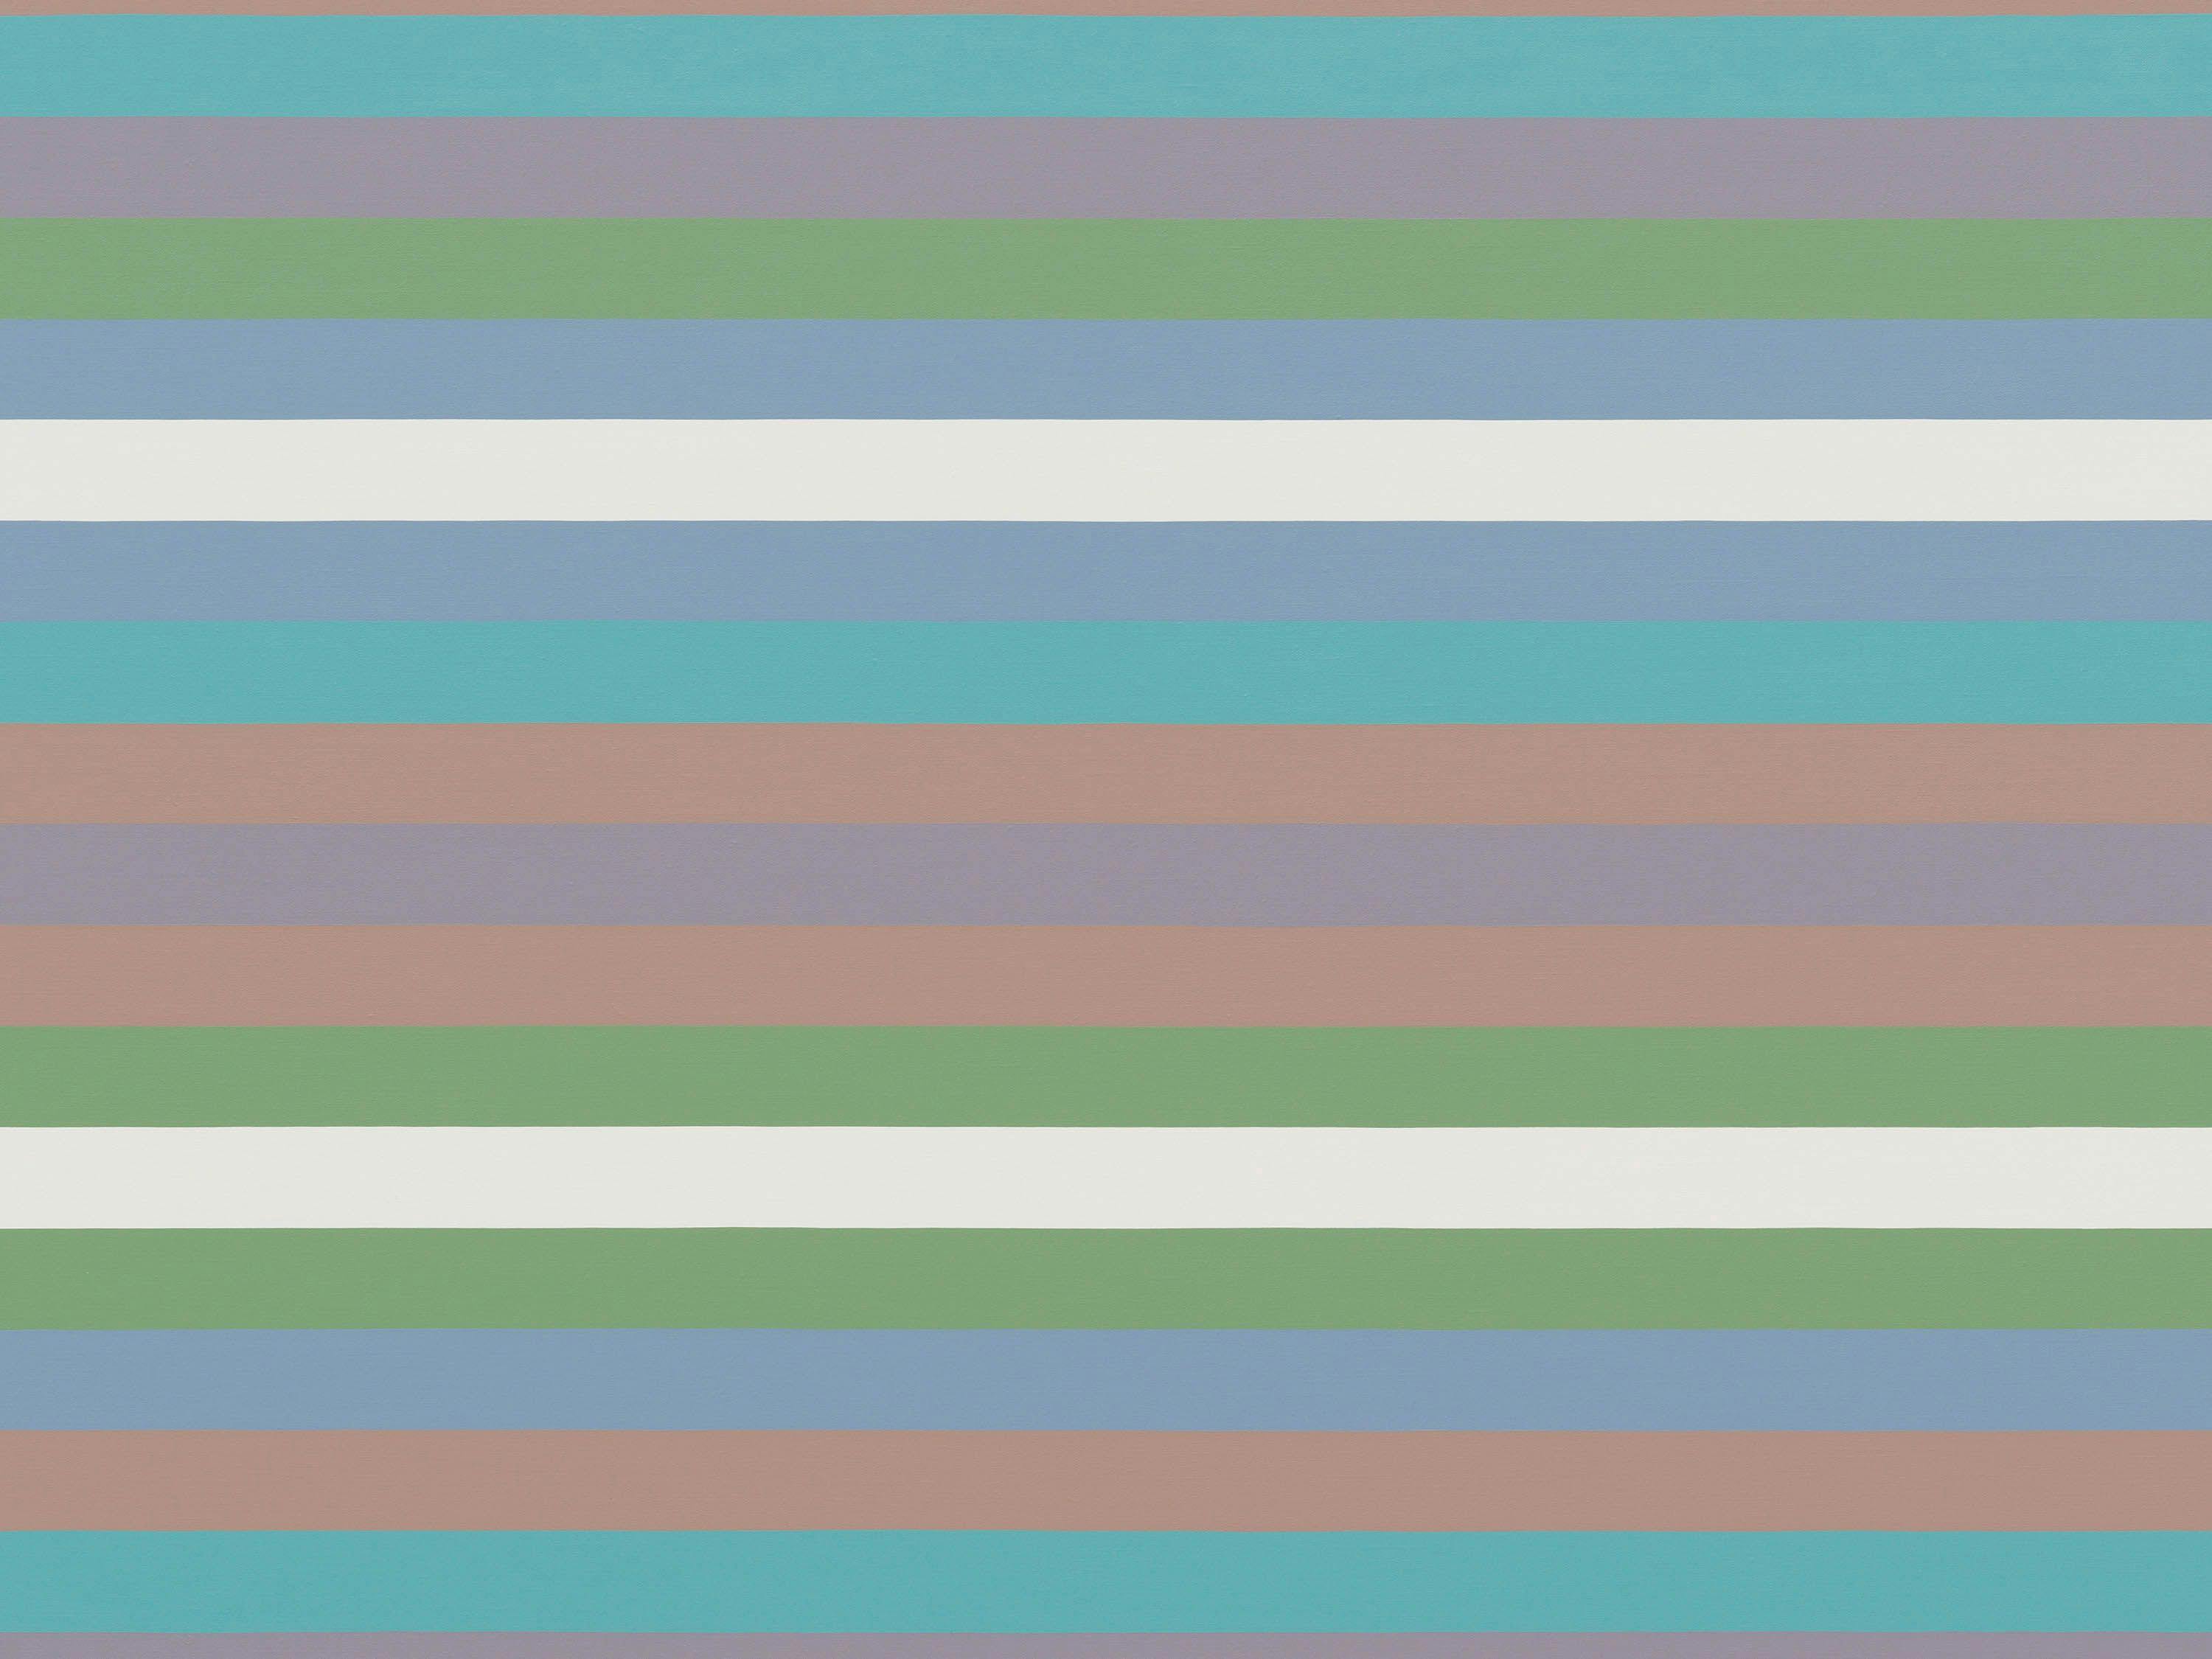 A detail from a painting by Bridget Riley, titled Intervals 12, dated 2021.